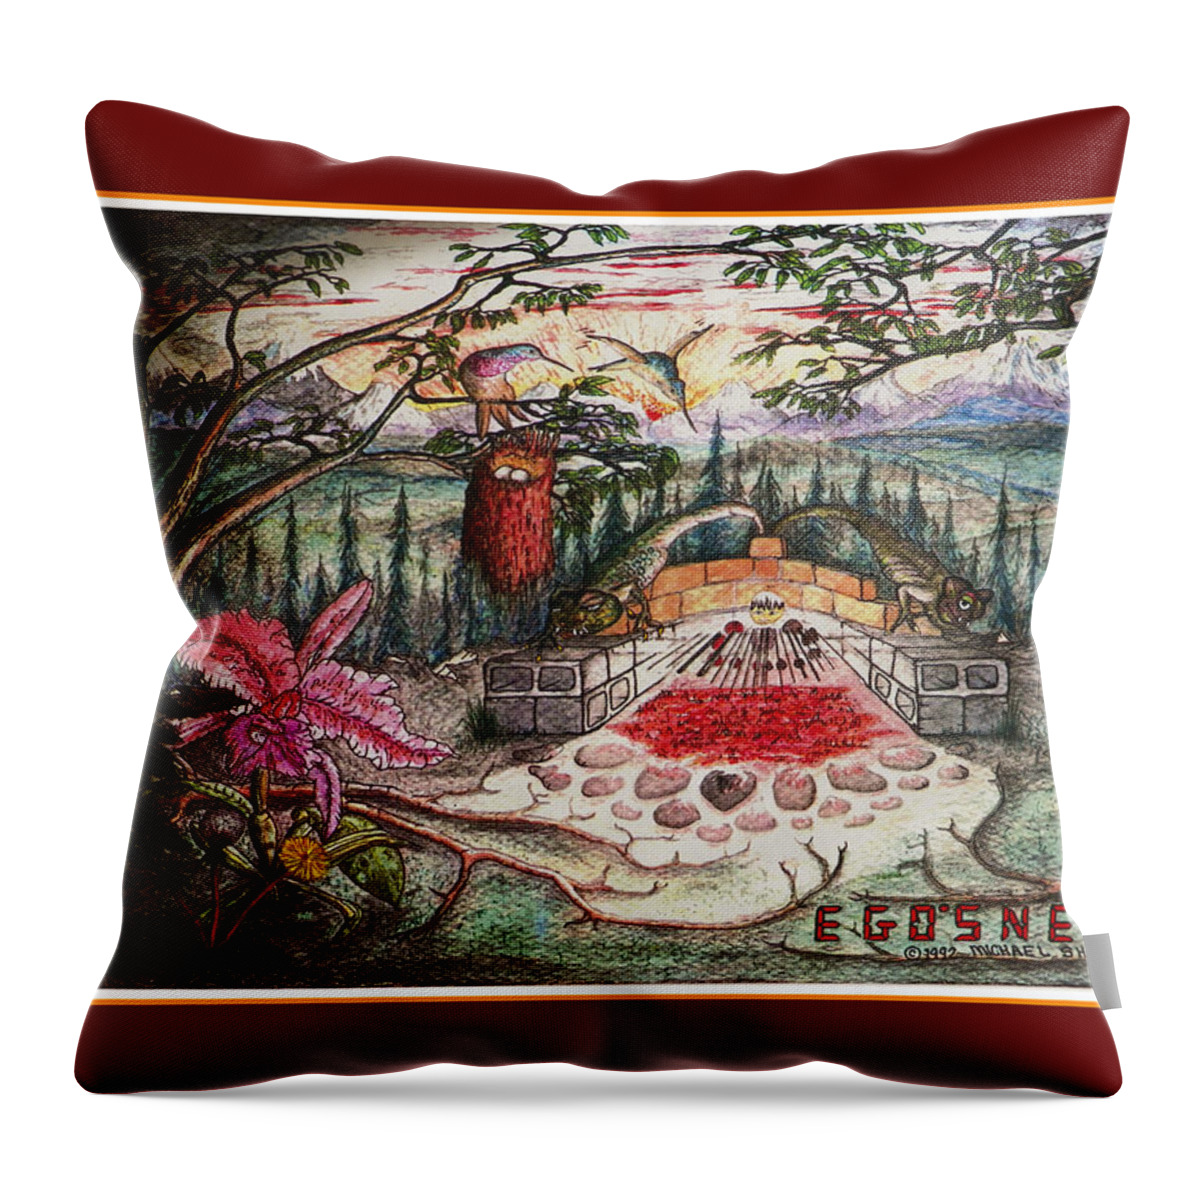 Dinosaurs Throw Pillow featuring the painting Egosnest Self Portrait with Dinosaurs by Michael Shone SR